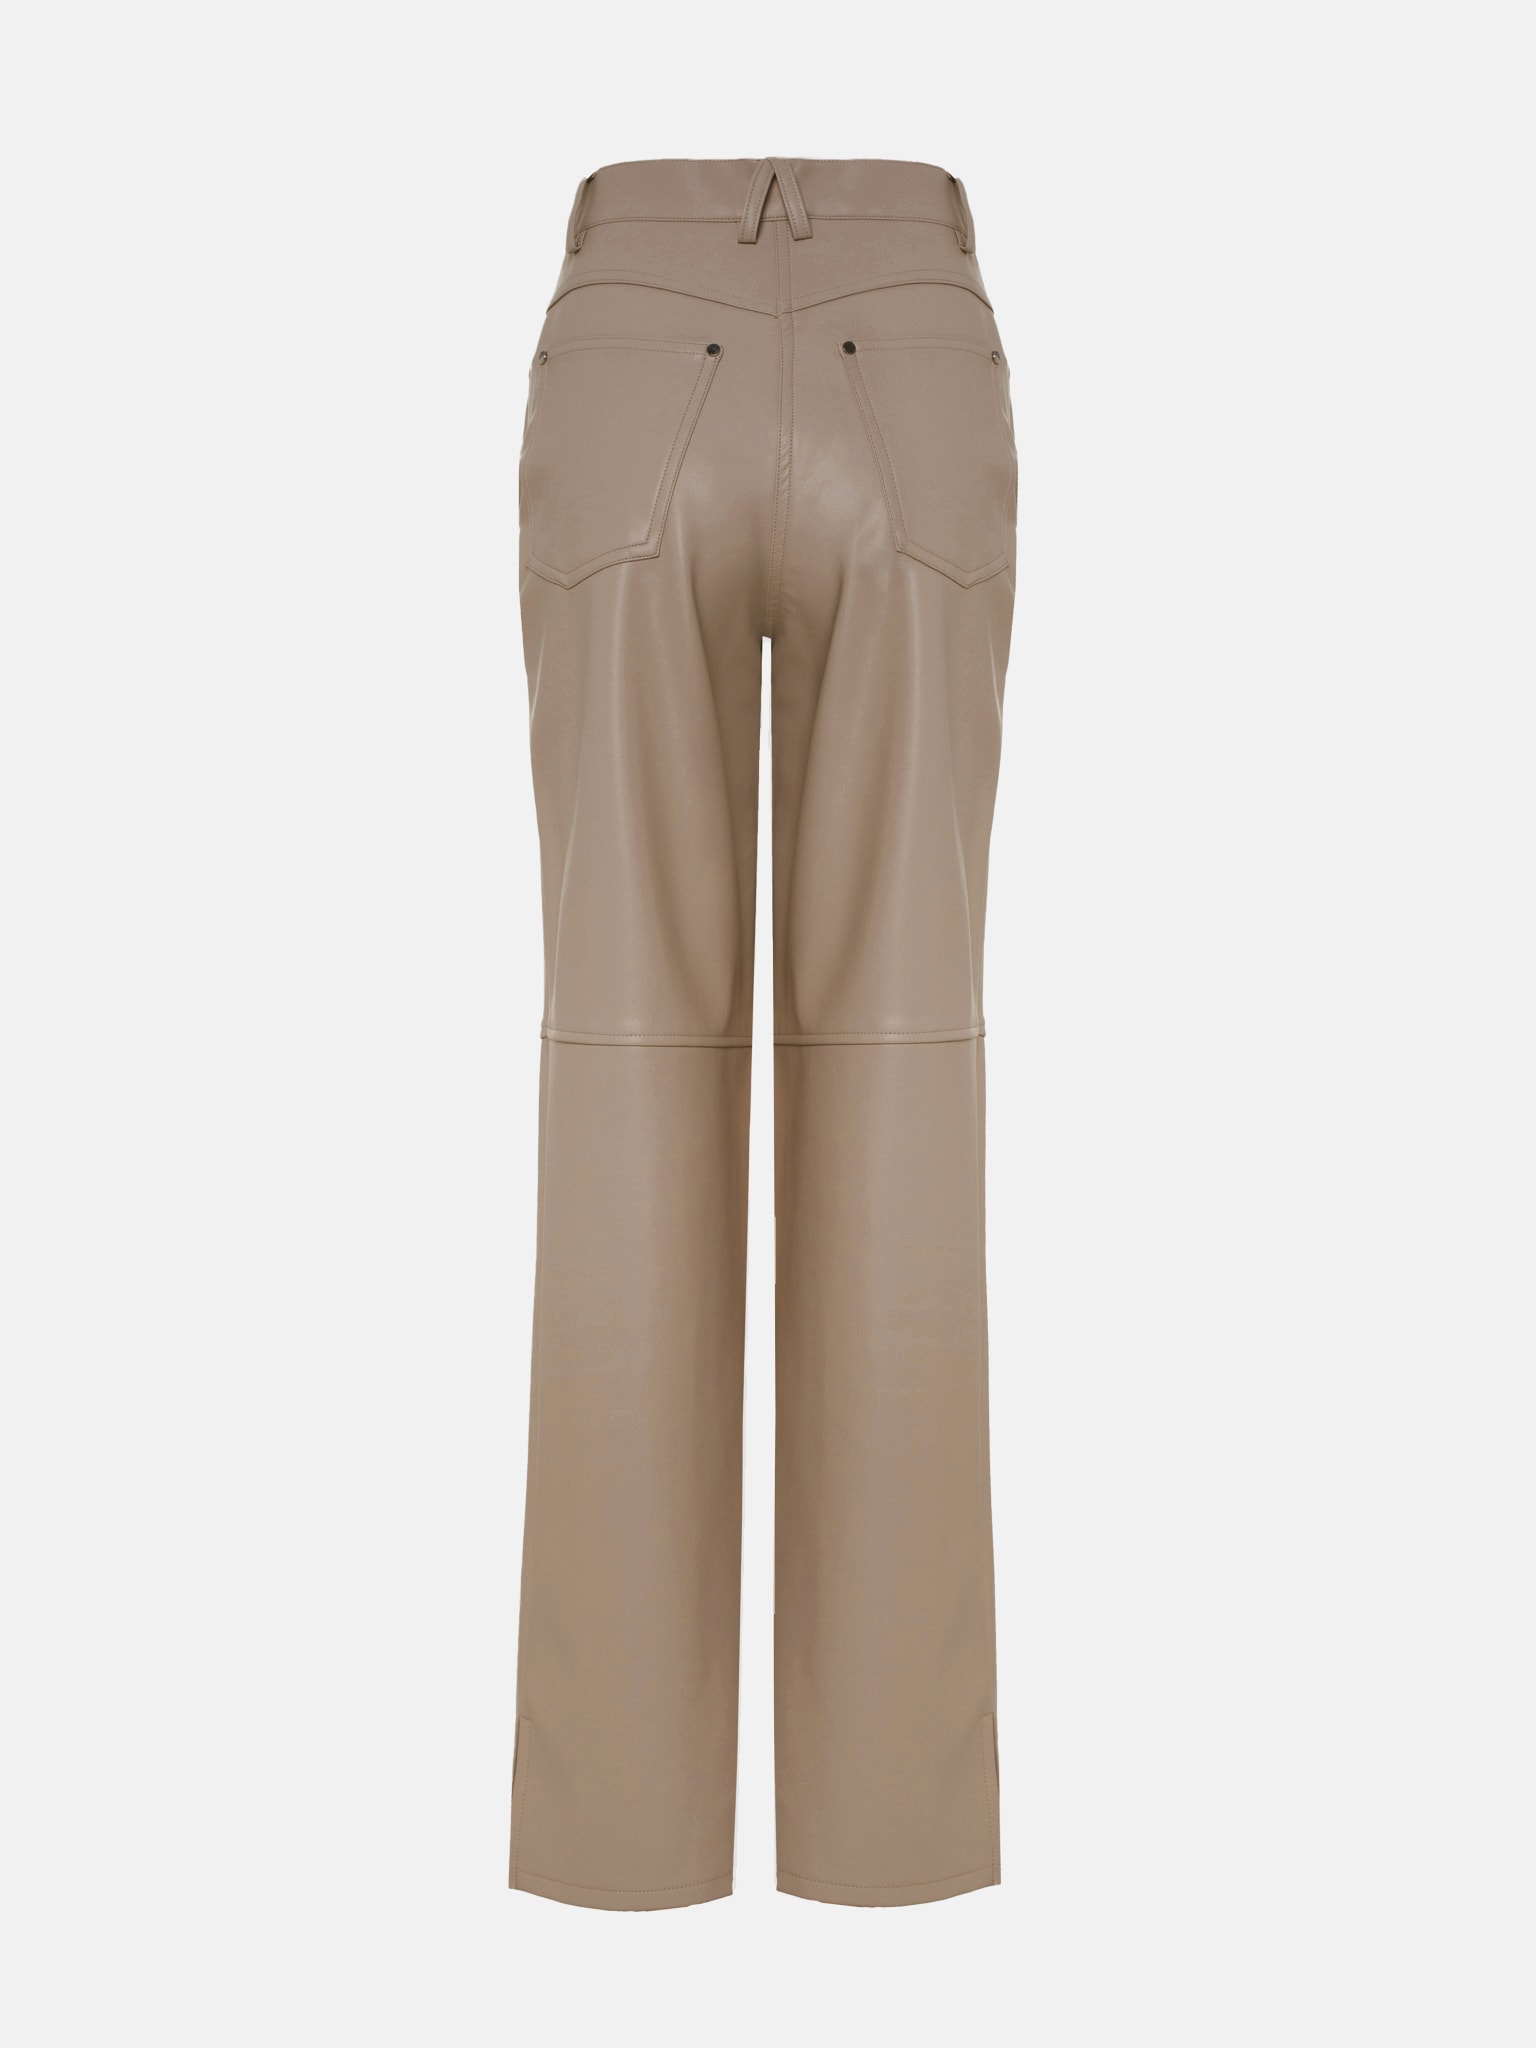 Zara FLARED LEATHER PANTS LIMITED EDITION